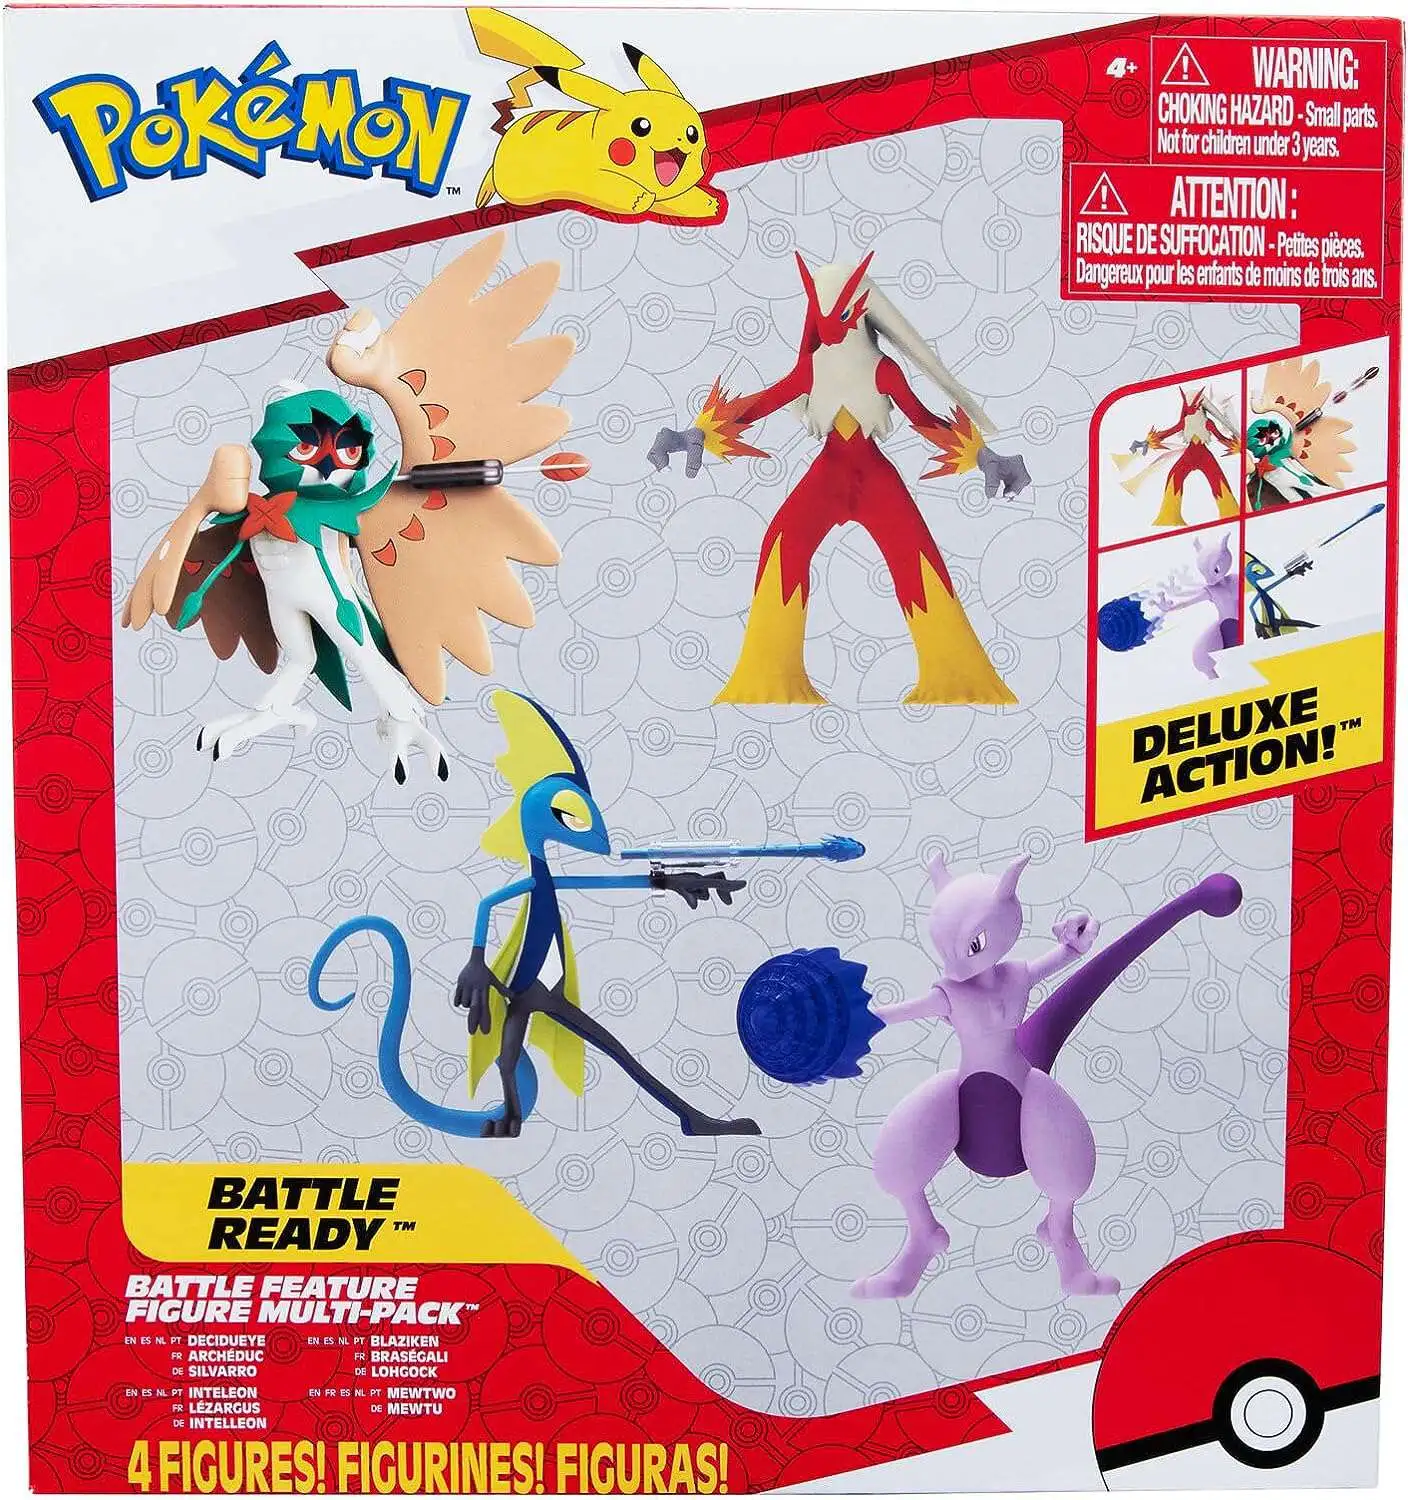 POKEMON BATTLE FIGURE 2 PACK - Features 2-Inch Mew & 4.5-Inch